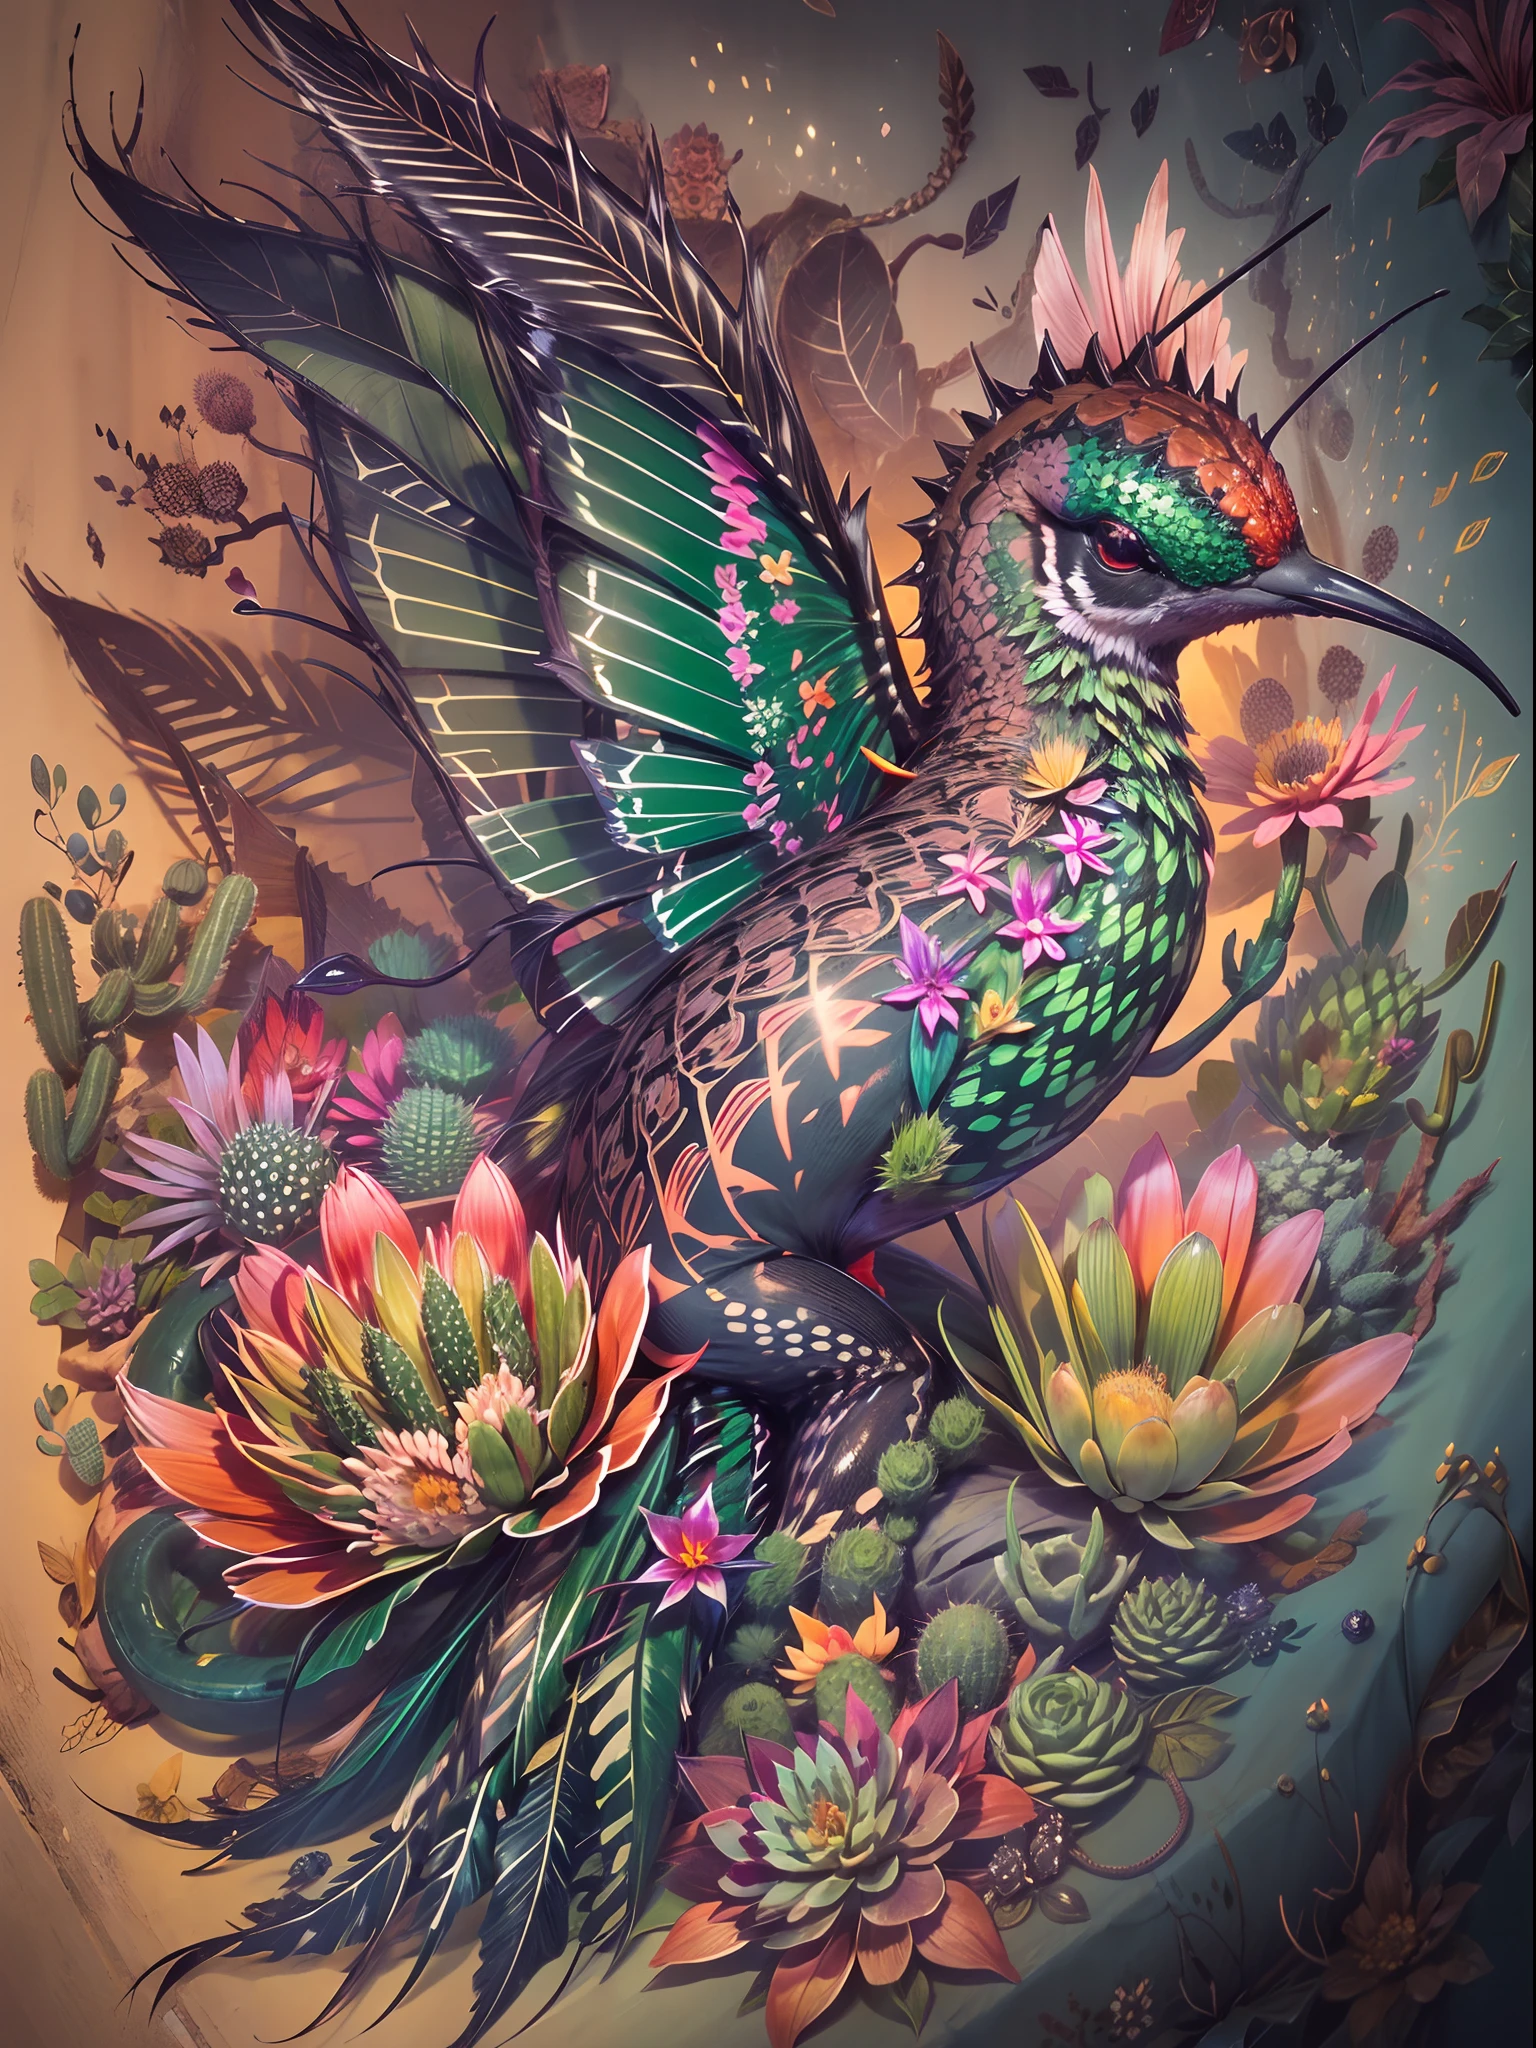 In this tattoo design, create a surreal creature that fuses the features of a hummingbird, a snake, and a cactus, with intricate details such as iridescent feathers, vibrant green scales with spines, and delicate flower blooms growing from the creature's prickly body, set against a dark and moody background with hints of sunset hues, to create a mesmerizing and unforgettable image.